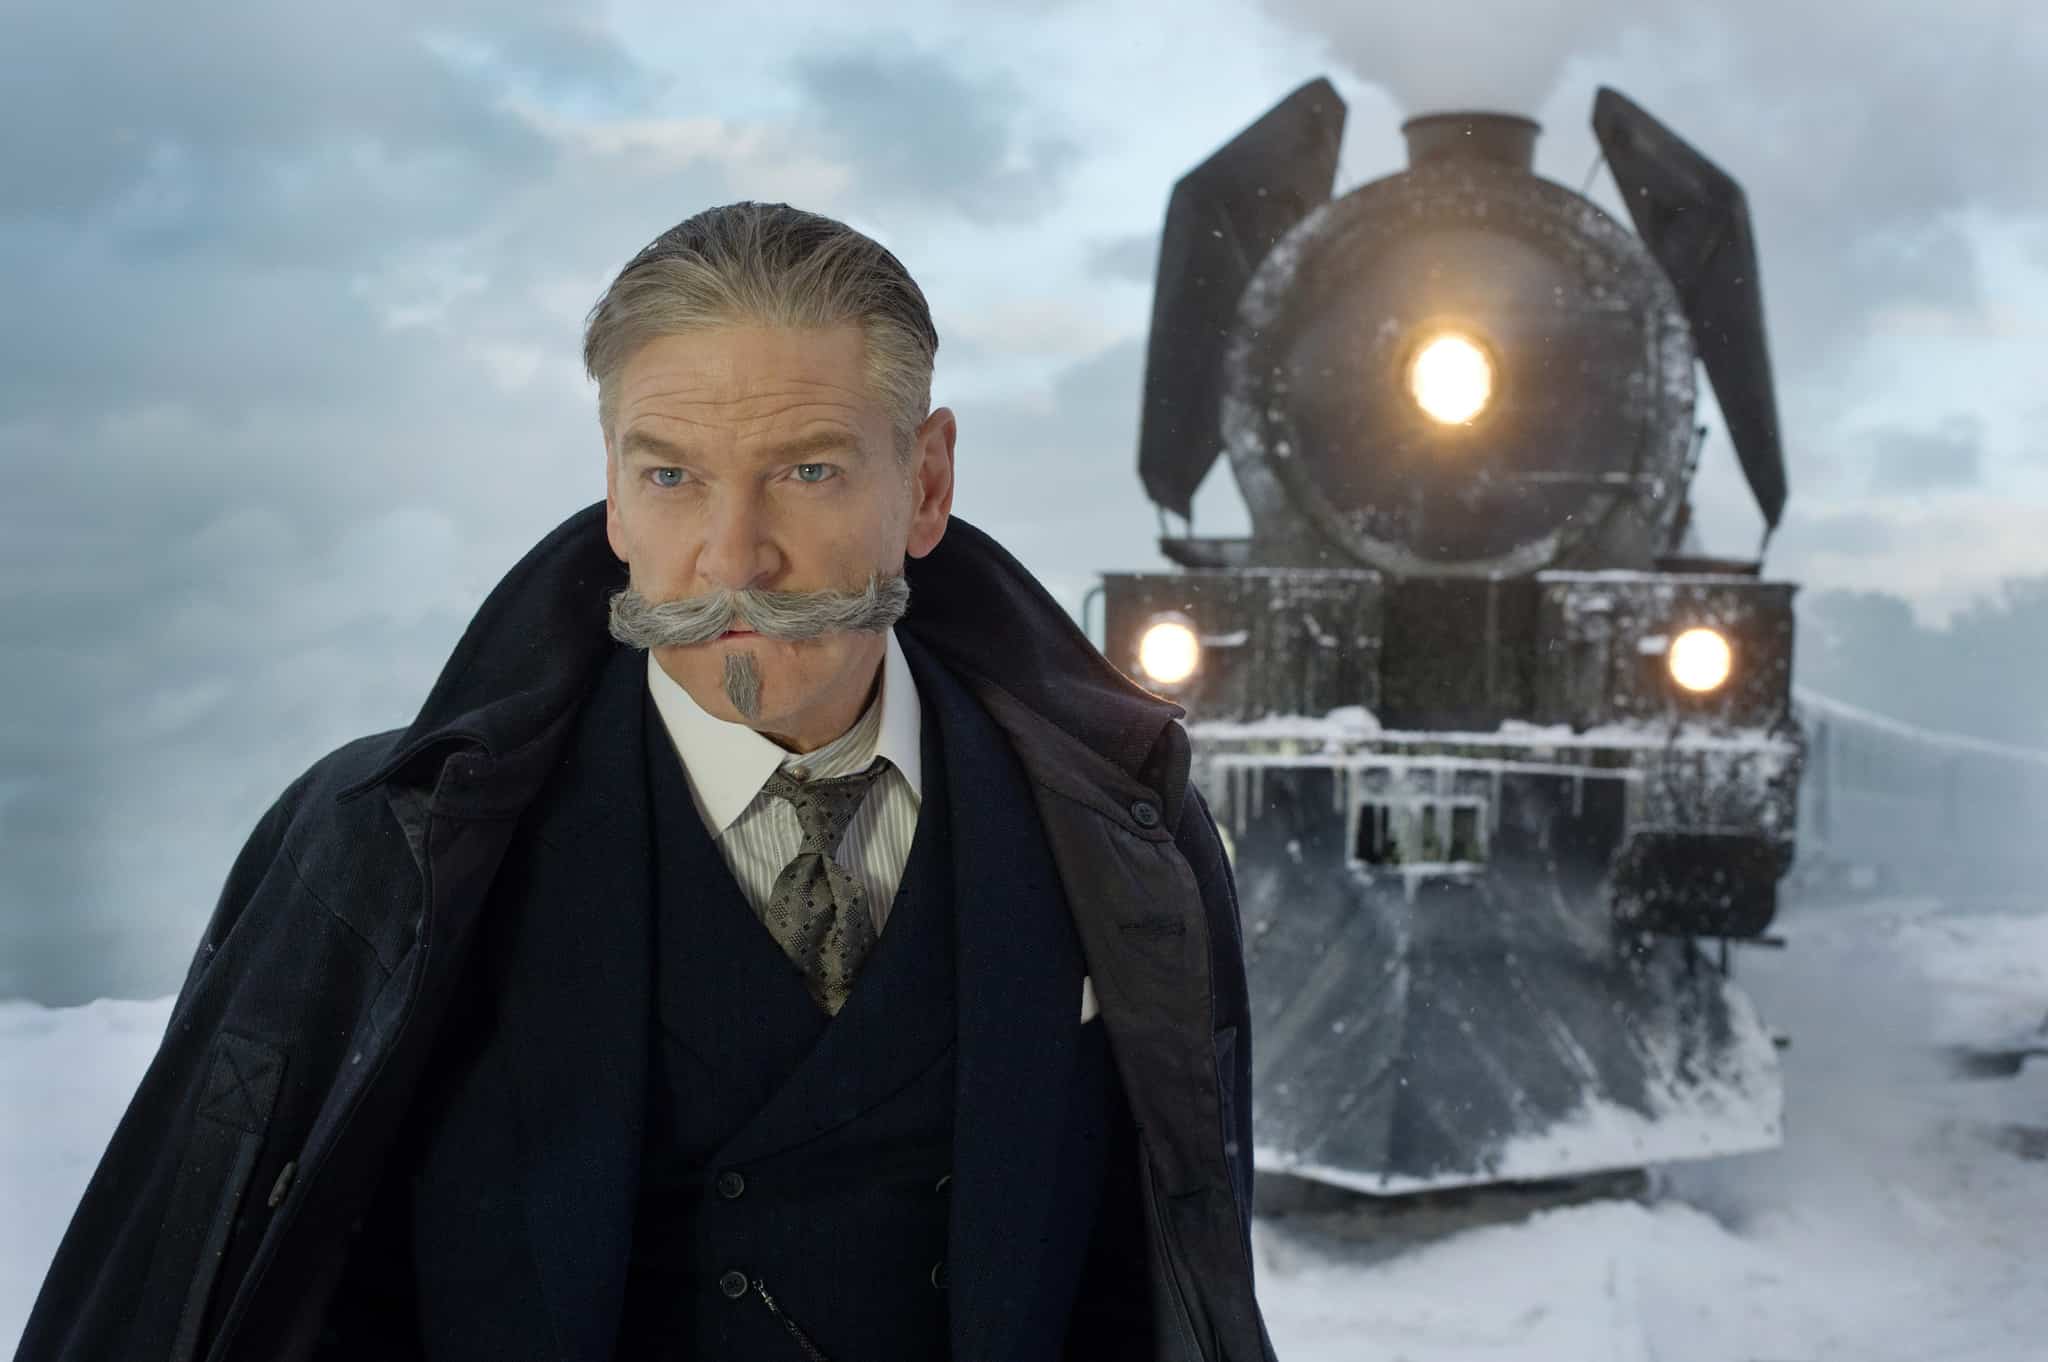 A man with an impressive mustache and beard stands in front of a train